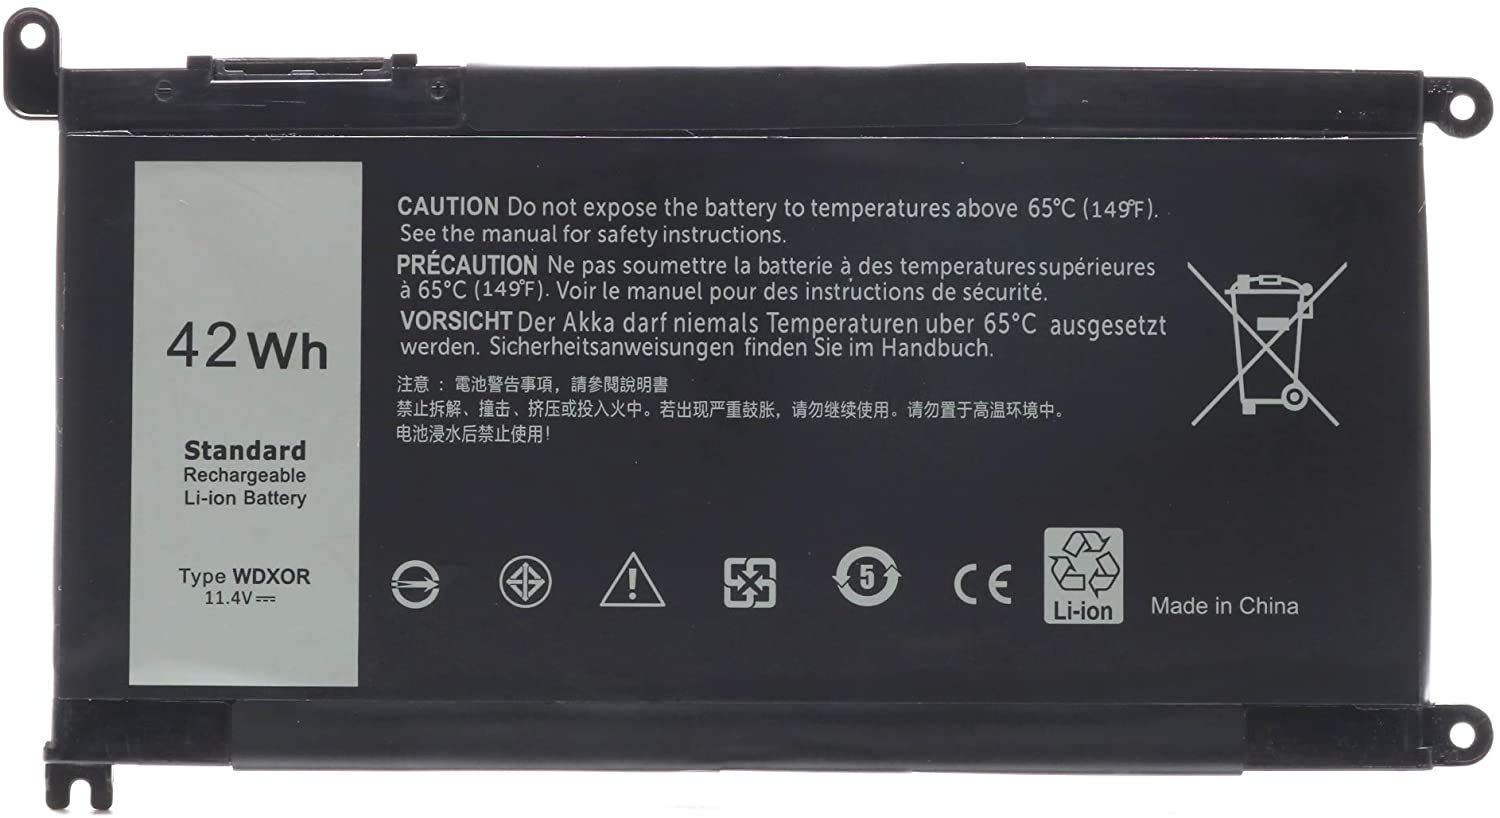 DELL WDXOR Laptop Battery Compatible with Dell Inspiron 13 7378 13 5000 5378 5368 15 7579 5567 5568 5578 7570 7569 Inspiron 5000 7000 17 5000 Series Laptop